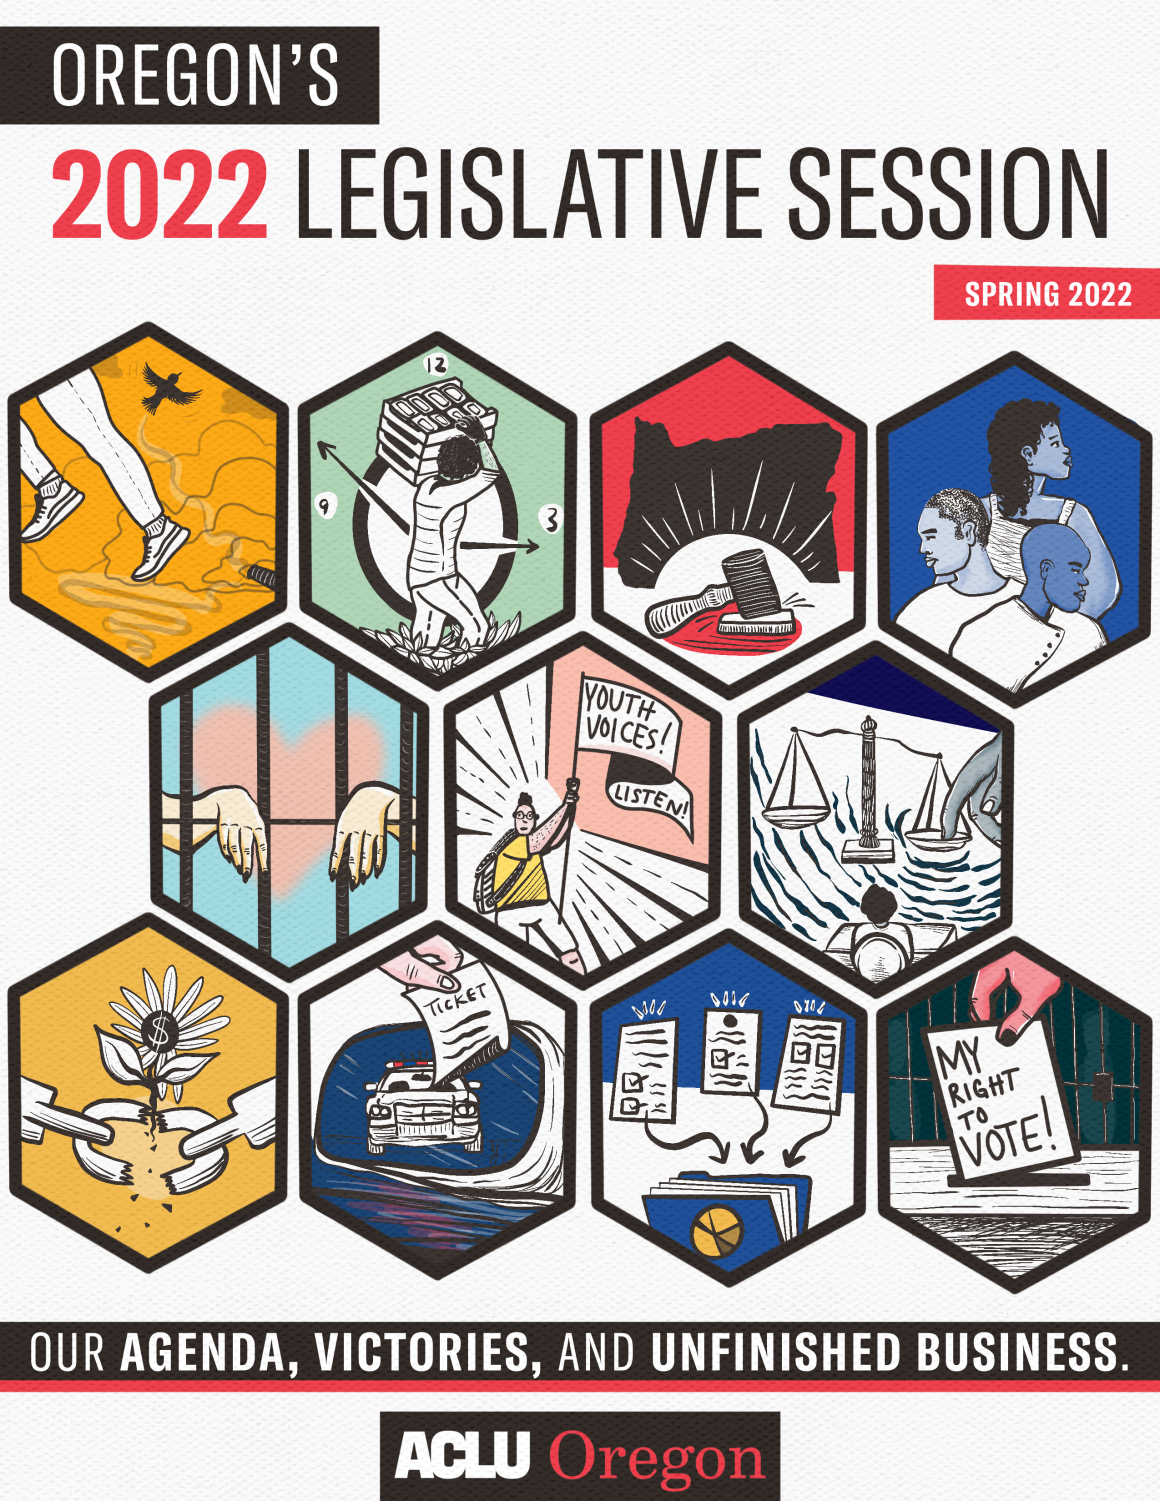 Cover of the report, with hexagonal illustrated icons representing priority bills. Text reads: Oregon's 2022 Legislative Session, spring 2022. Our agenda, victories, and unfinished business. ACLU Oregon